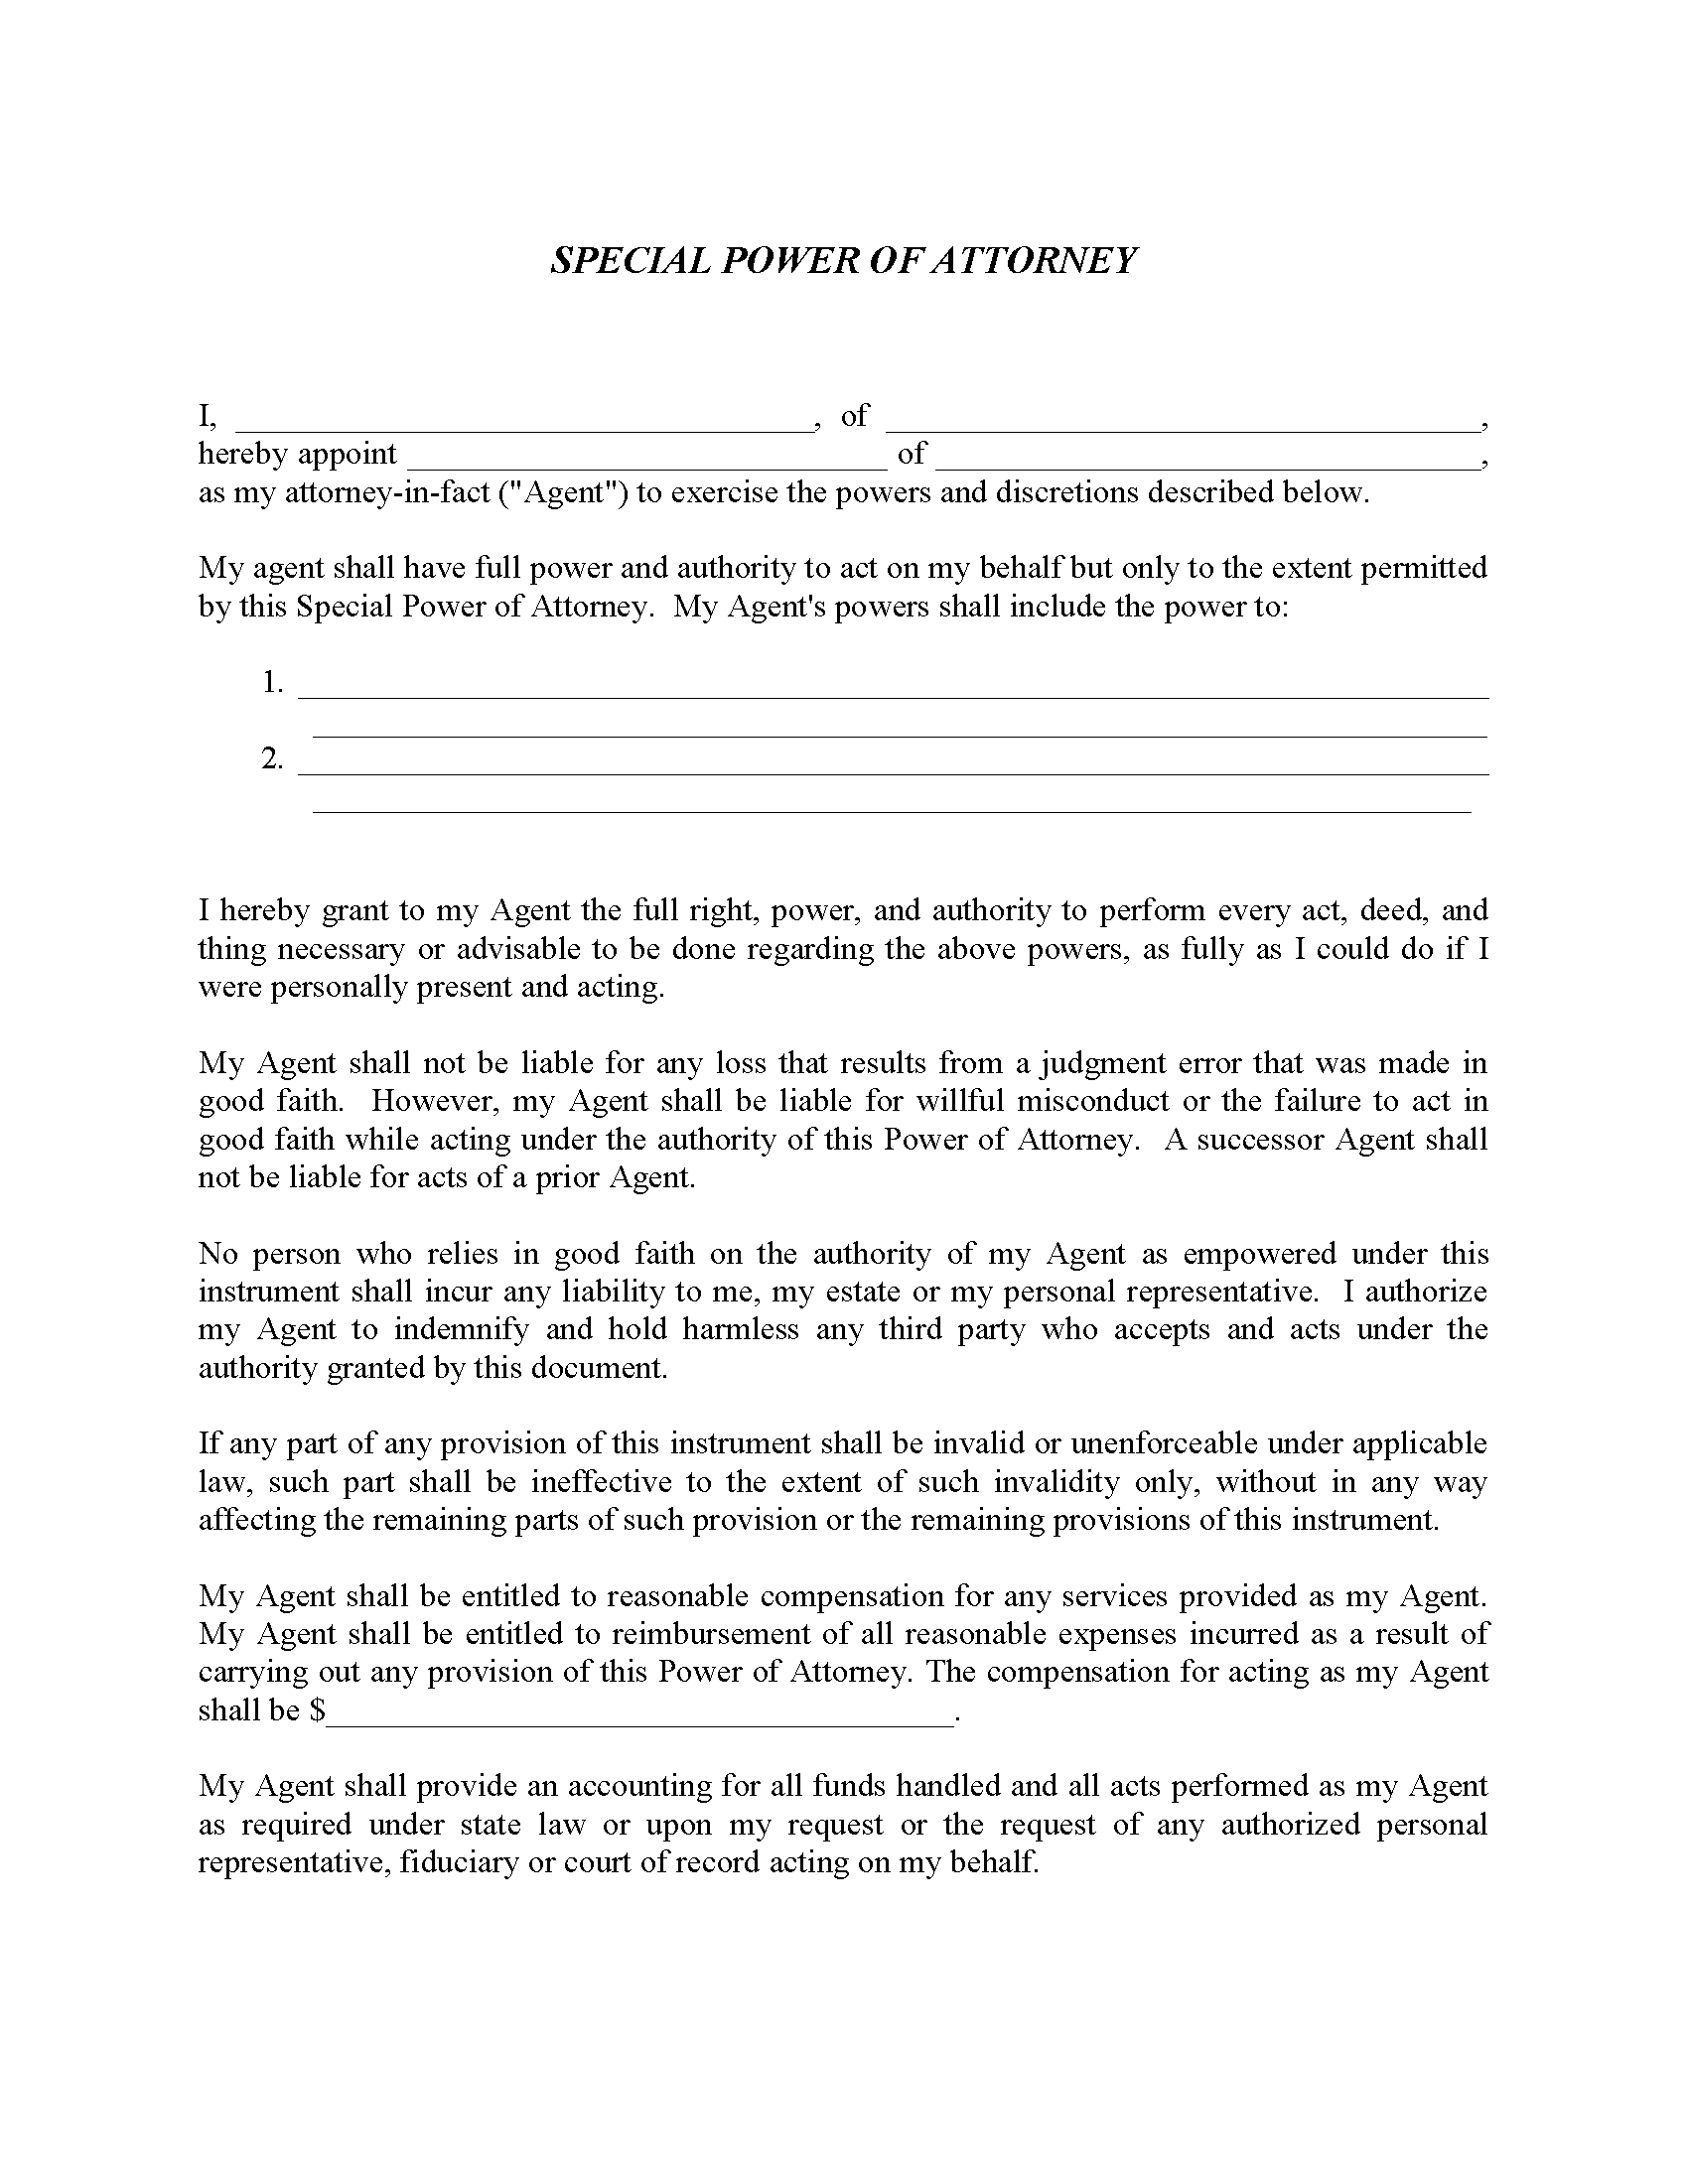 limited-power-of-attorney-form-pdf-invest-detroit